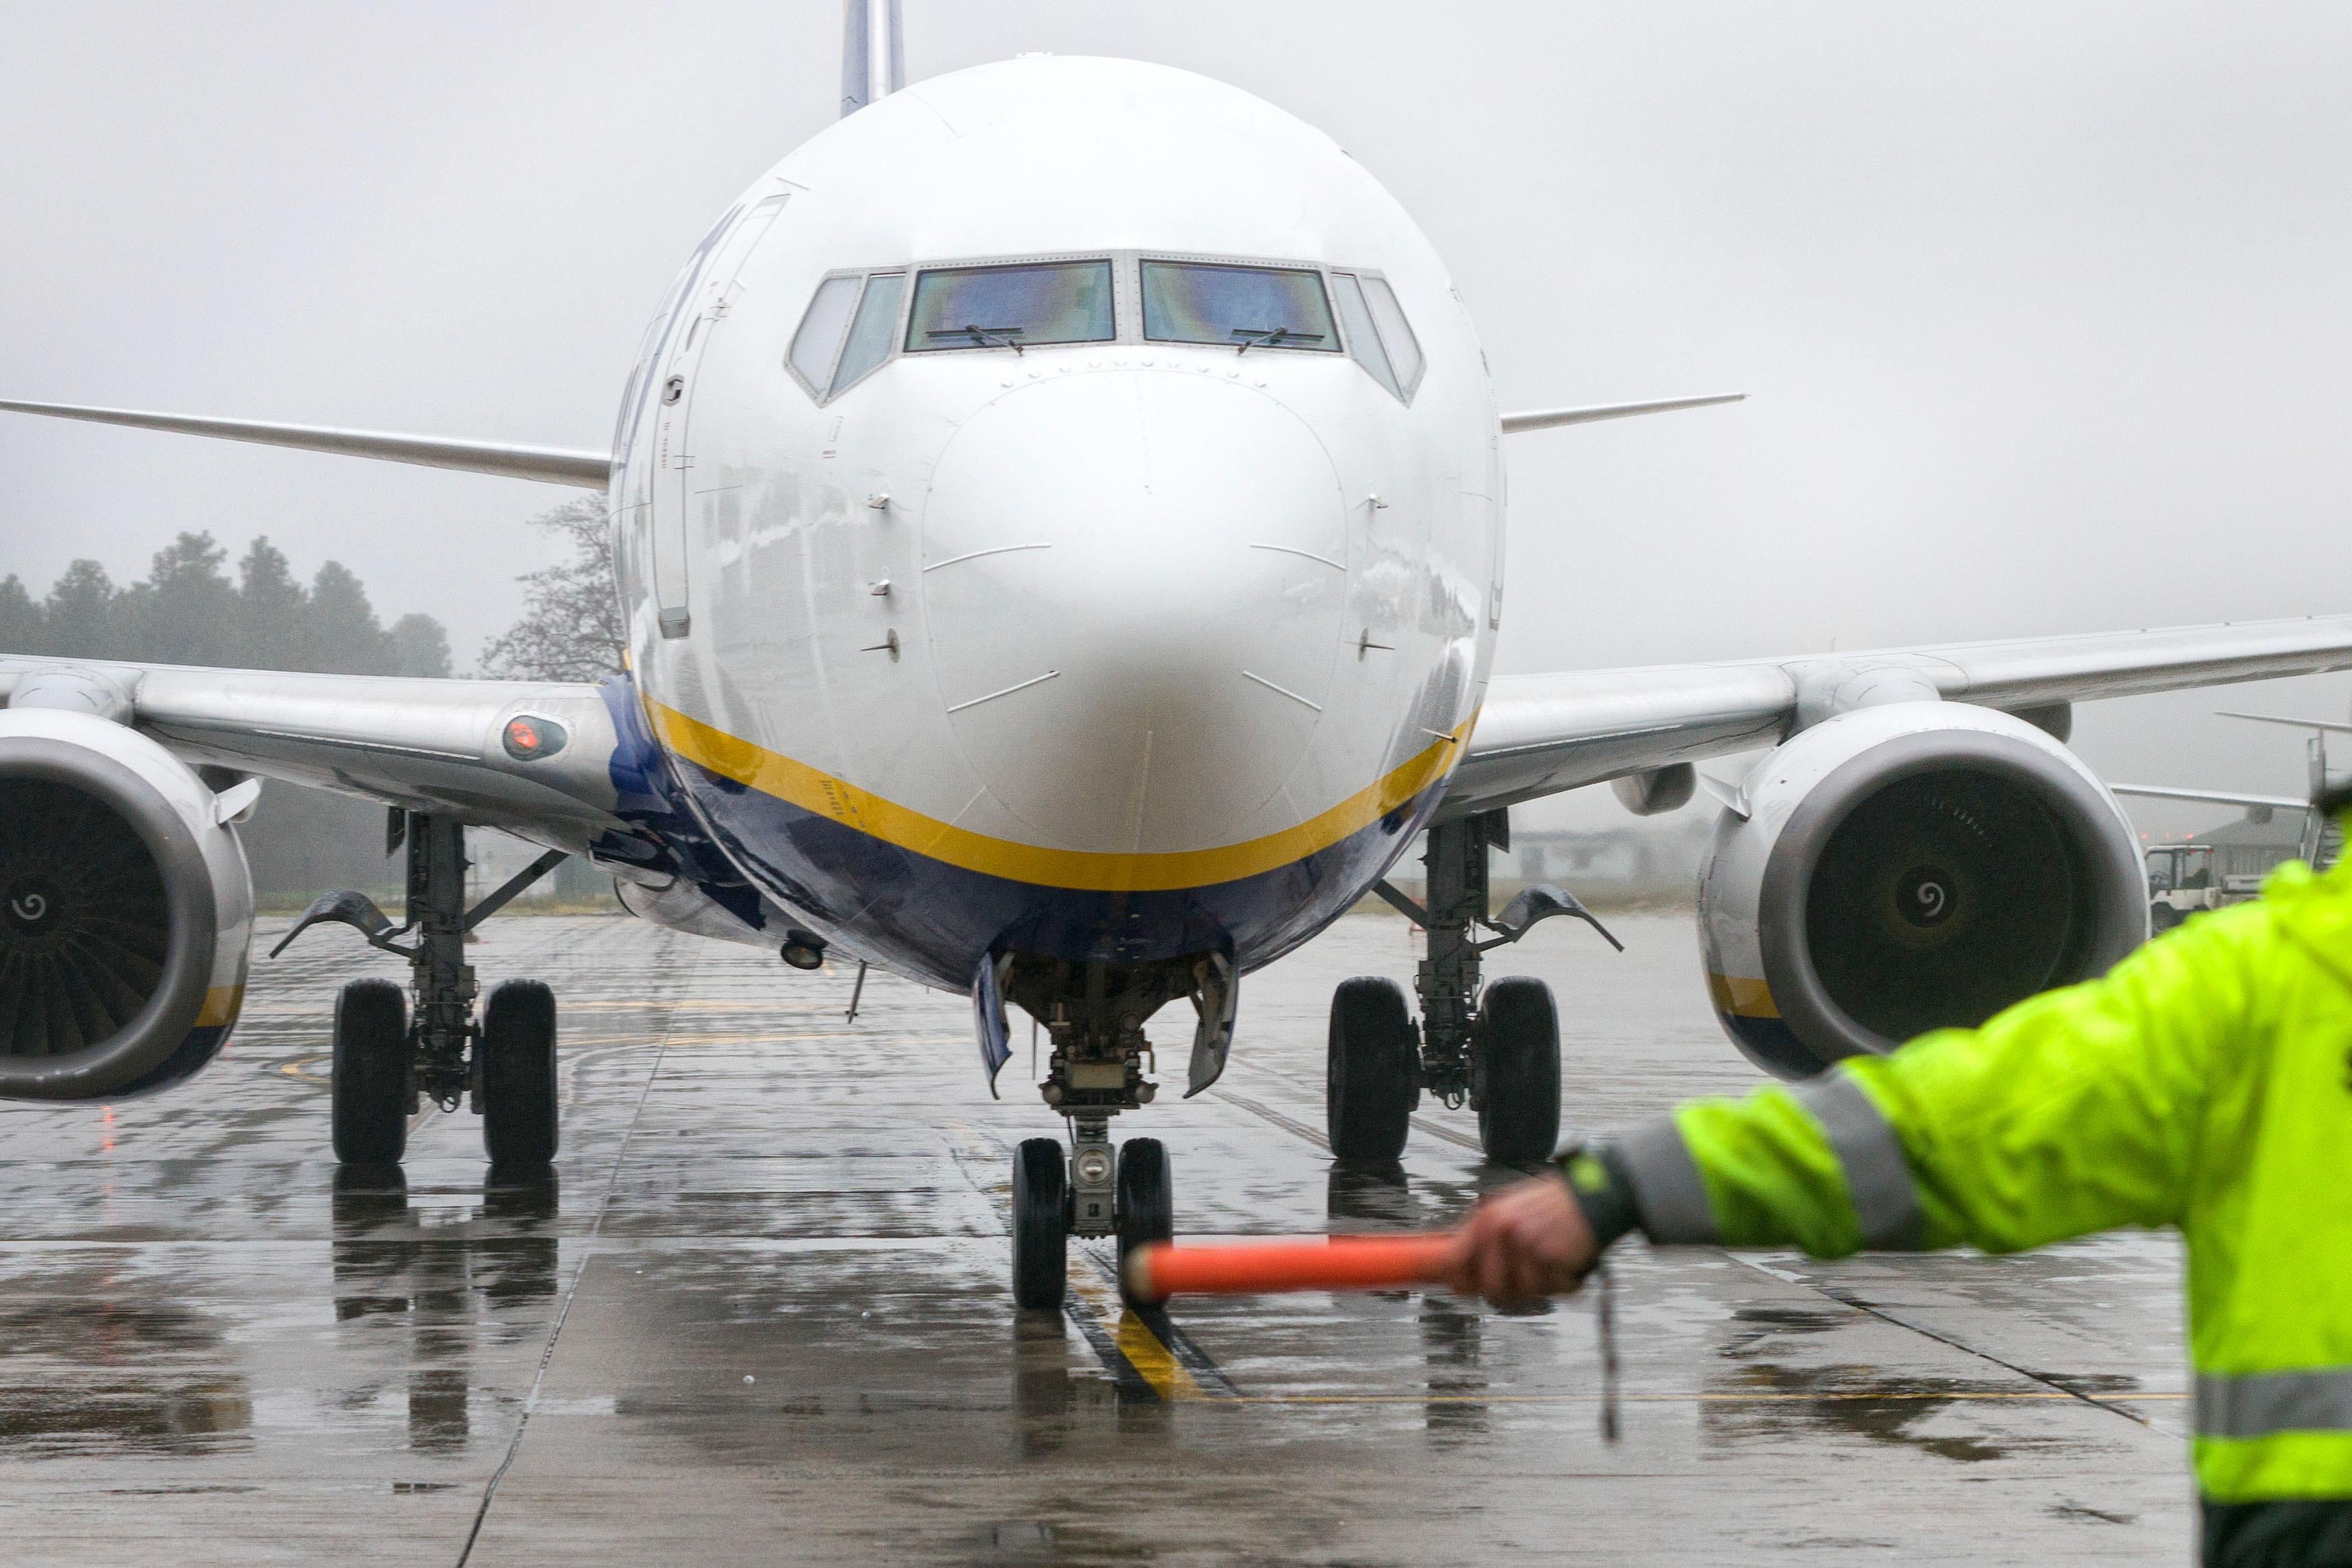 An employee helps a passenger aircrafts of the Irish low-cost airline company Ryanair to park on the tarmac of the airport in Weeze, western Germany on December 22, 2017.
Passengers travelling with Ryanair in Germany on December 22, saw little disruption from a four-hour strike called by a pilots' union, with most flights leaving as scheduled, and only some delays. Germany's powerful Cockpit union had asked Ryanair pilots to walk off the job from 5-9am (0400-0800 GMT) in a battle for recognition from the Irish no-frills carrier whose workers have been calling for better pay and conditions across Europe. But the first-ever strike action by Ryanair pilots in the company's 32-year history appeared to have made little impact, with no cancellations reported.

 / AFP PHOTO / dpa / Arnulf Stoffel / Germany OUT        (Photo credit should read ARNULF STOFFEL/AFP/Getty Images)